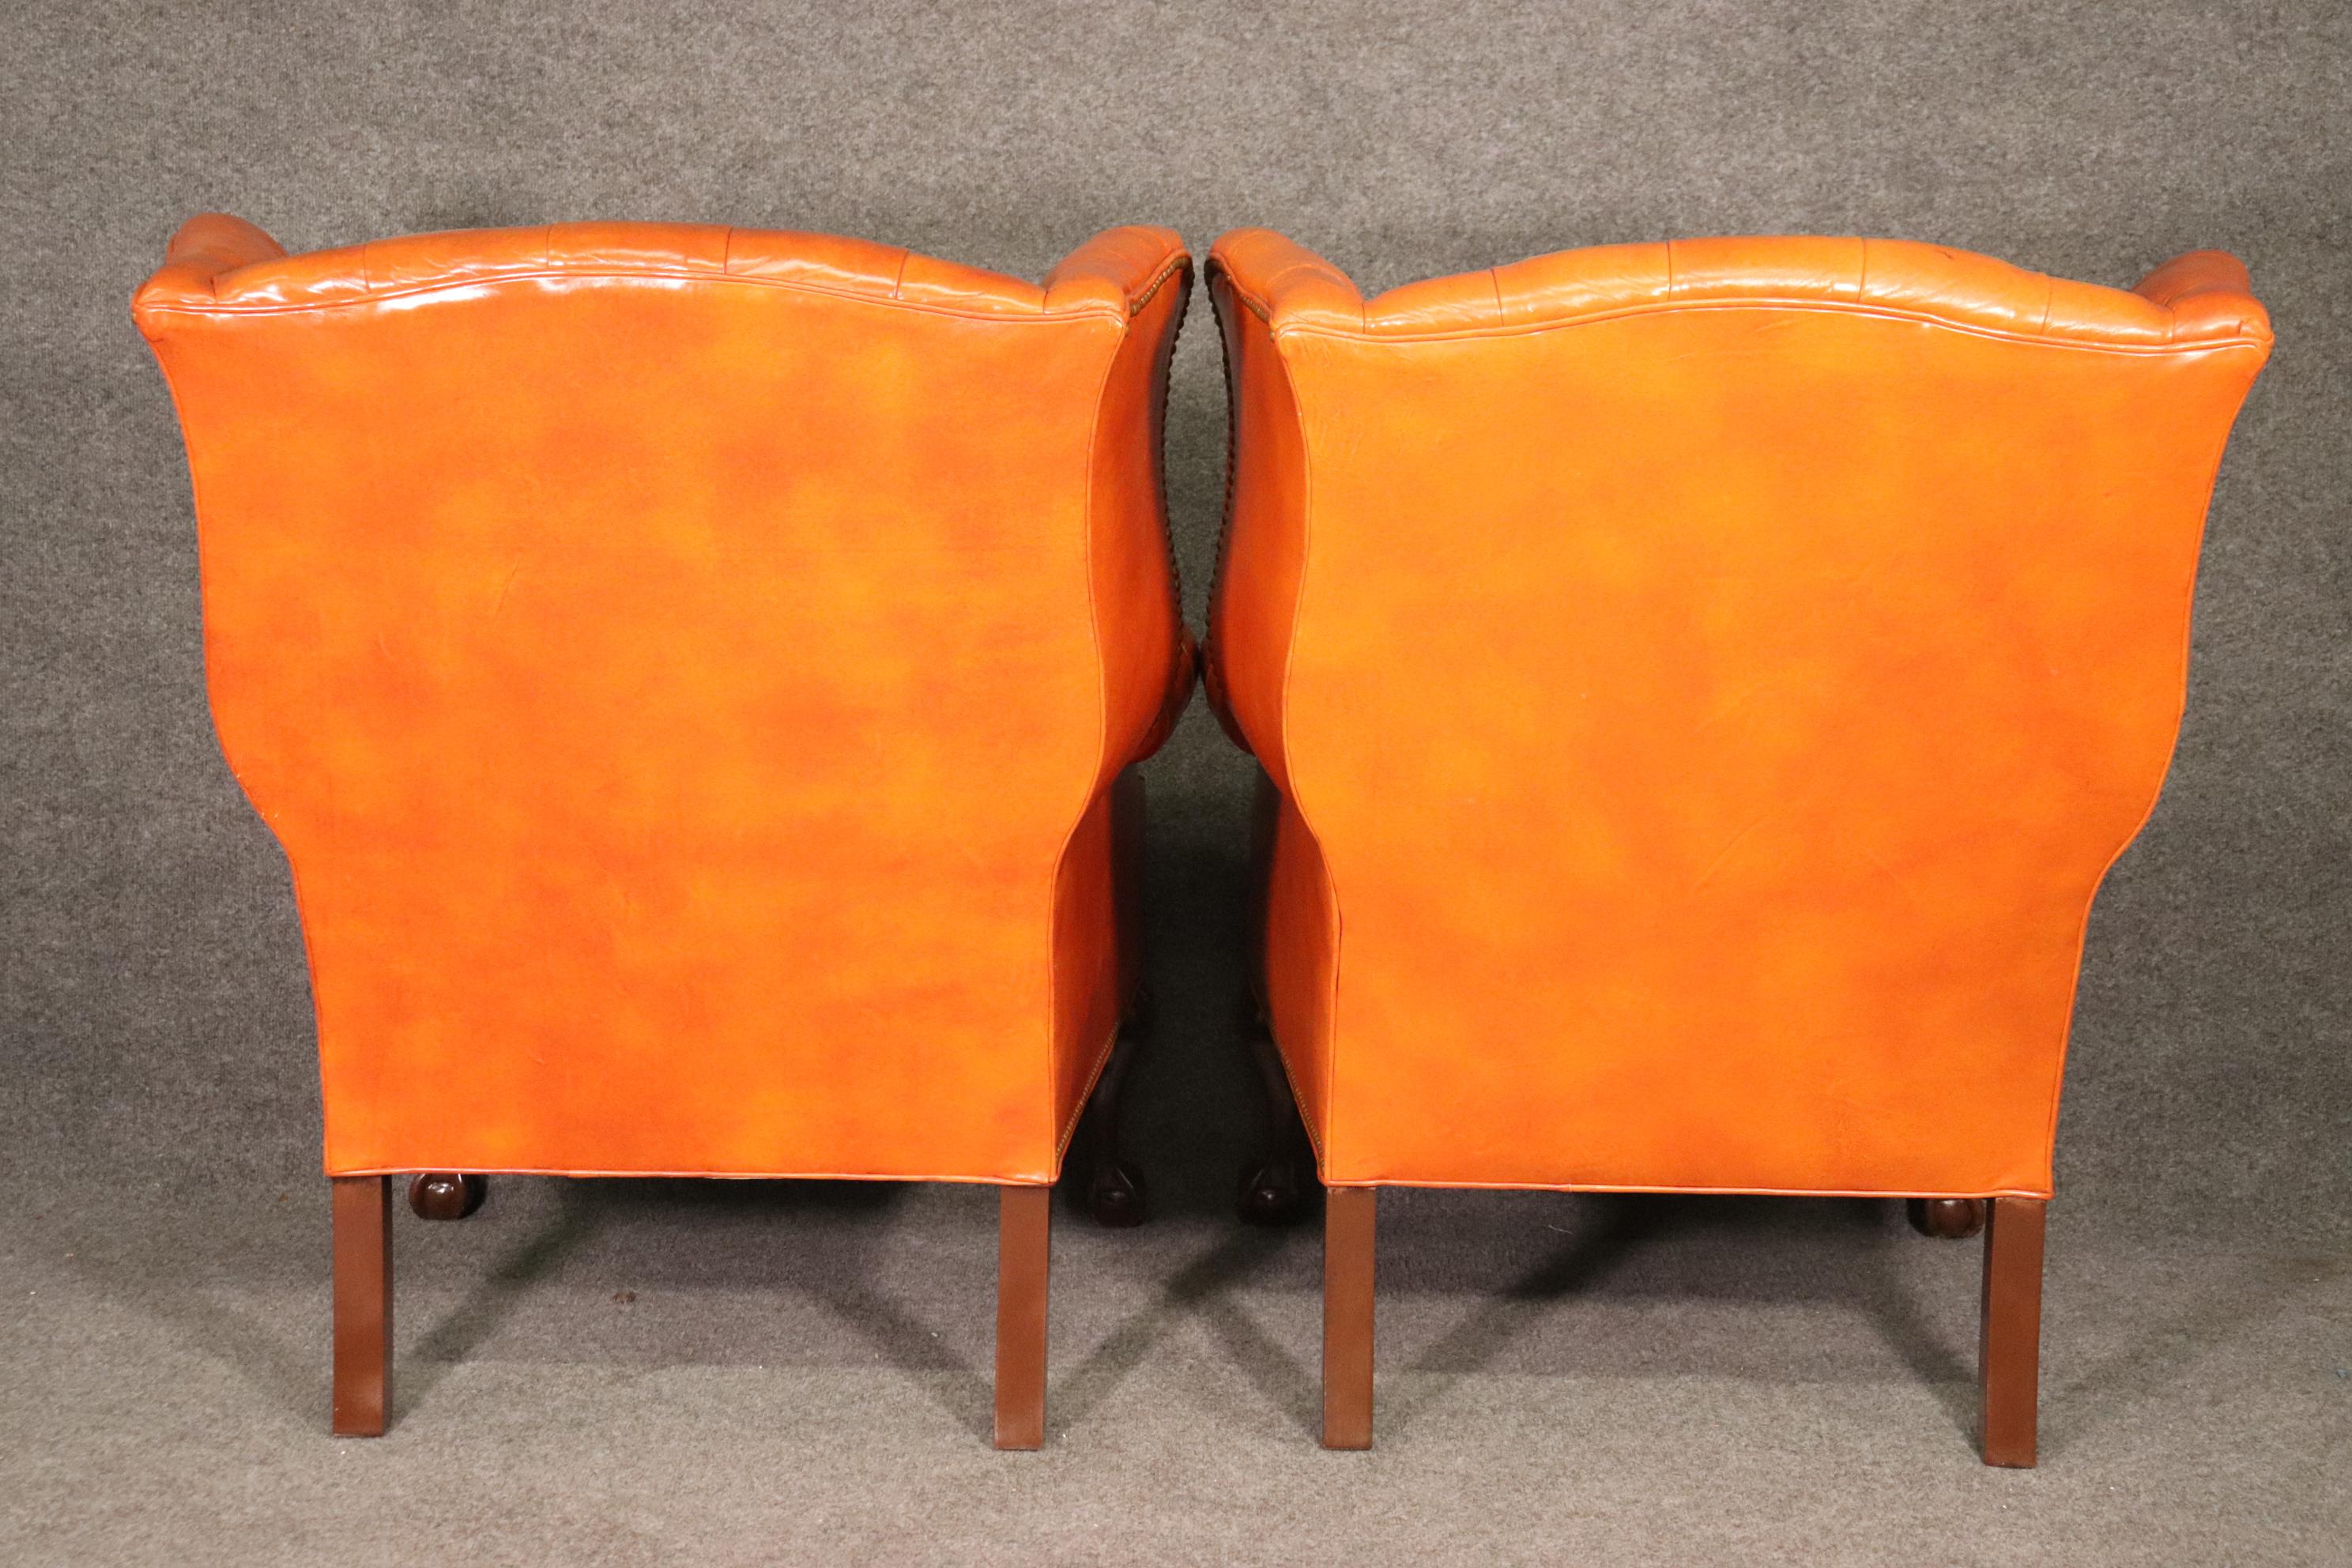 Walnut Very Nice Pair of Orange Chesterfield Wing Back Chairs with one stool